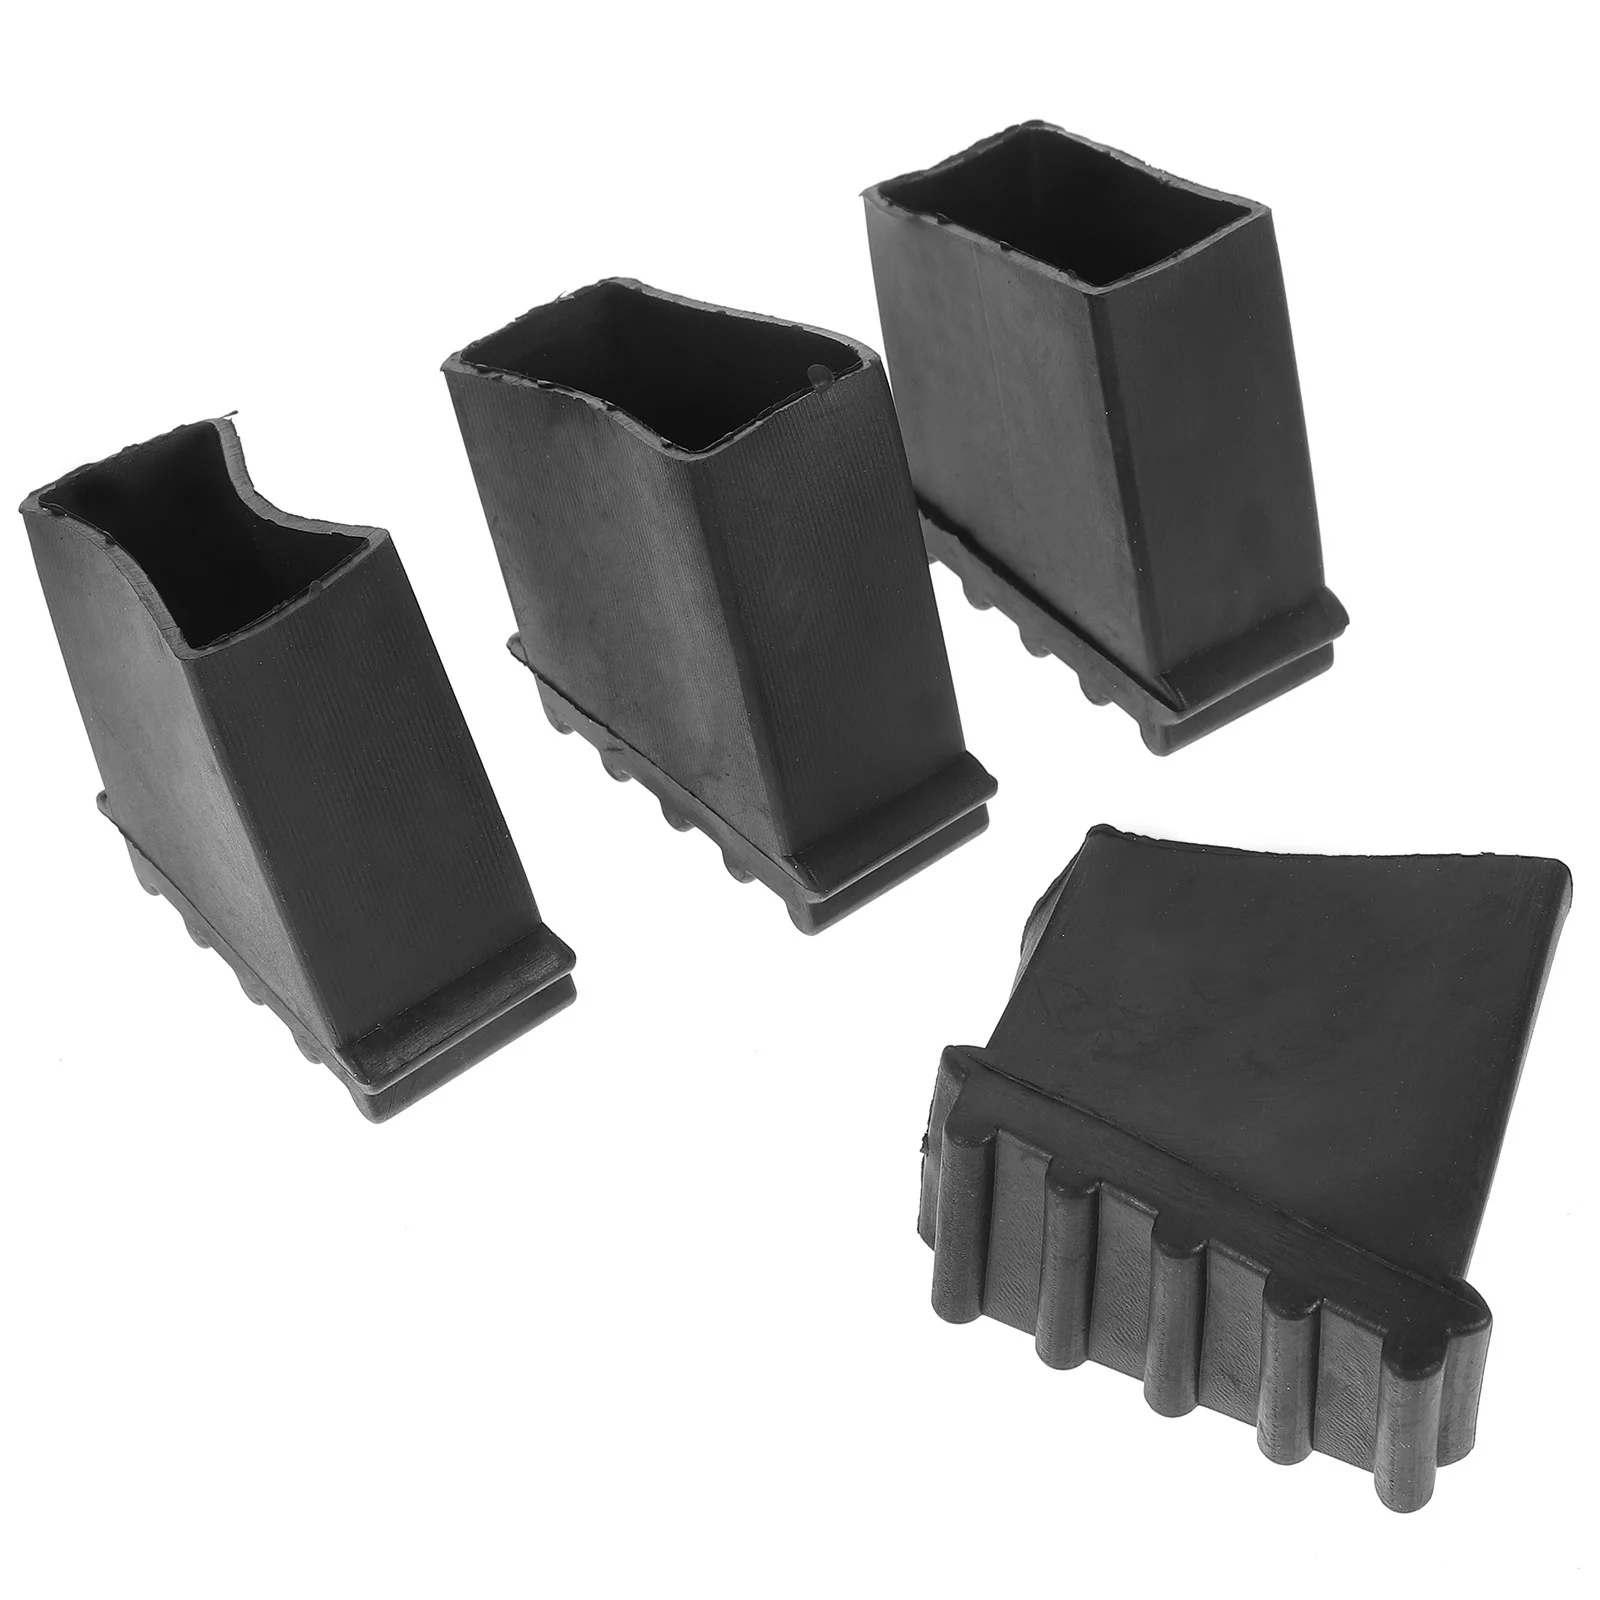 

4 Pcs Ladder Foot Cover Wear-resisting Pads Step Telescopic Feet Protect Rubber Protector Furniture